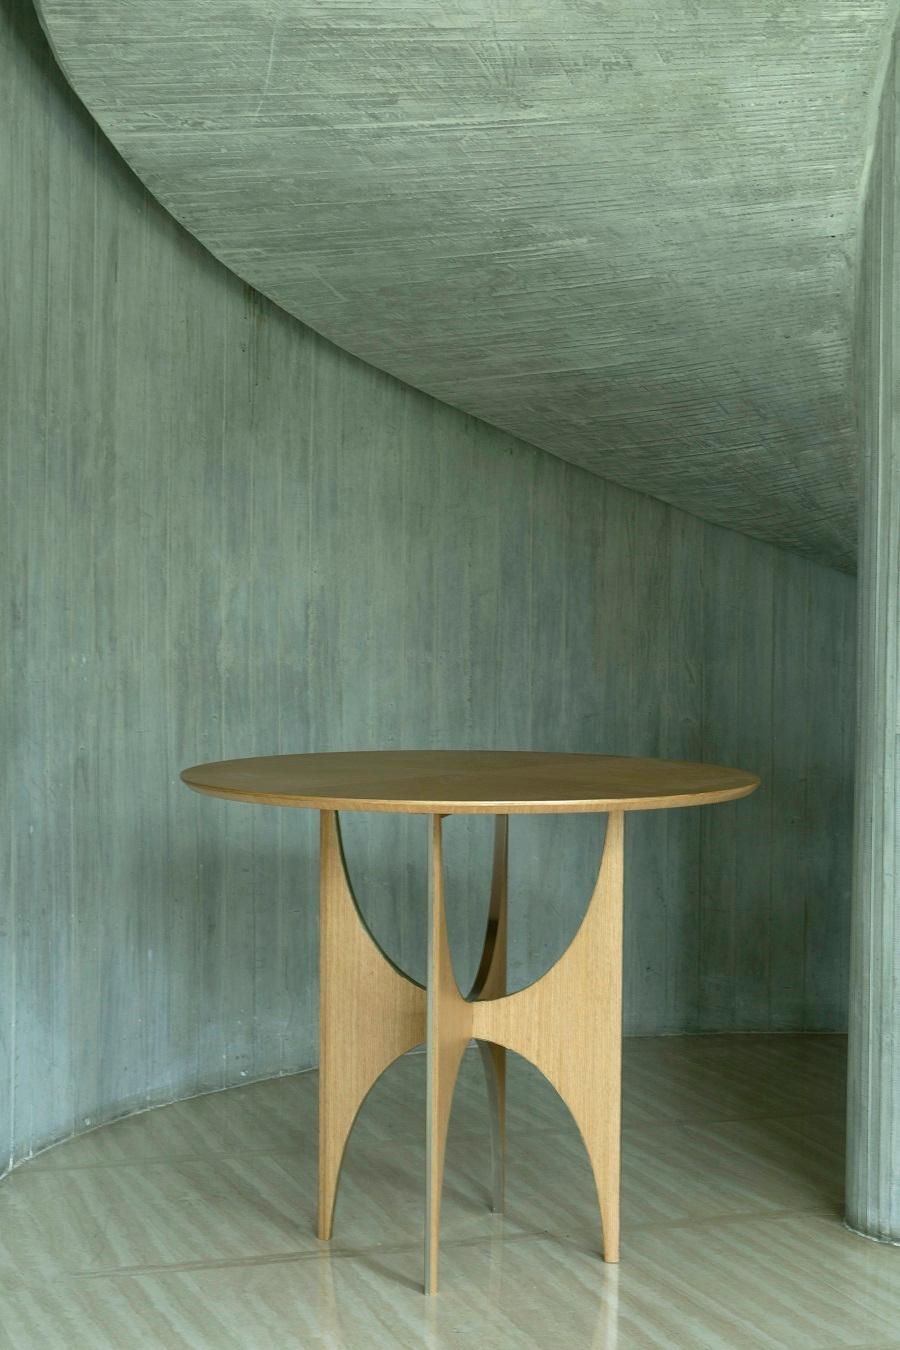 Arc round table
Baltic birch plywood with quarter cut white oak veneer
(Brass and stainless steel
Inlays upon request)
Designed by Ana Volante
Dimensions:
75cm (H) x 90cm (D)
29.5